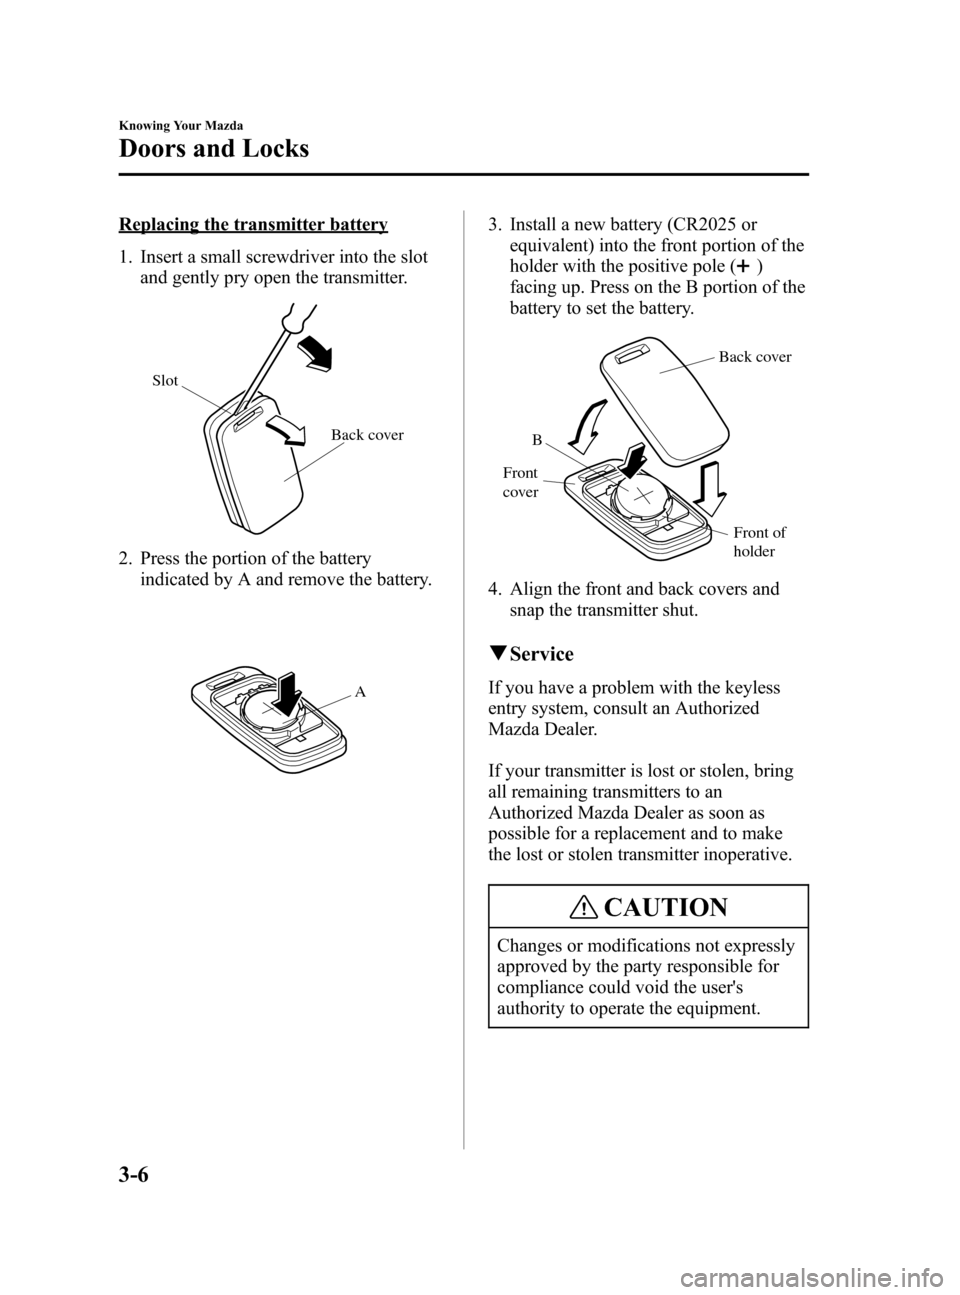 MAZDA MODEL 3 HATCHBACK 2005  Owners Manual (in English) Black plate (74,1)
Replacing the transmitter battery
1. Insert a small screwdriver into the slot
and gently pry open the transmitter.
Back cover Slot
2. Press the portion of the battery
indicated by A